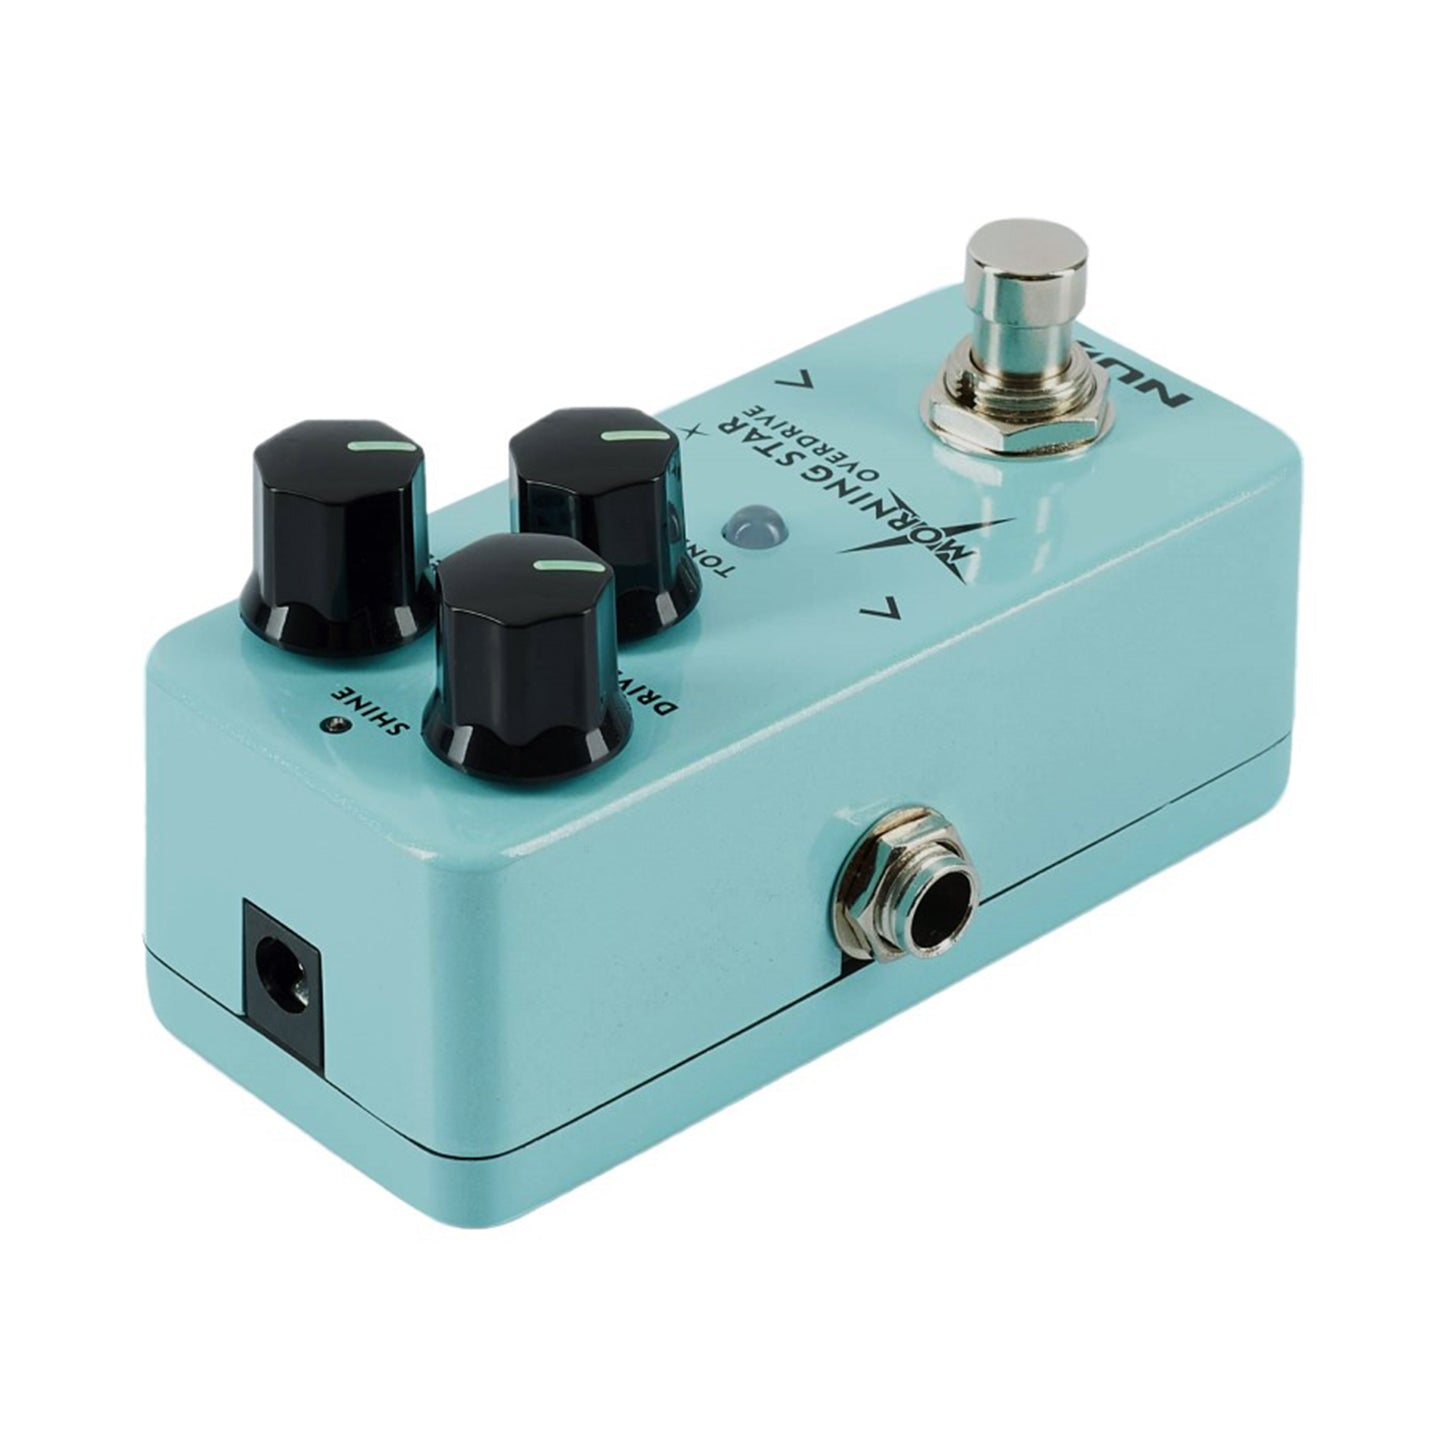 NUX Morning Star Overdrive Mini Guitar Effects Pedal with Shine Mode, Level and Tone Controls for Blues Rock Style (NOD-3)